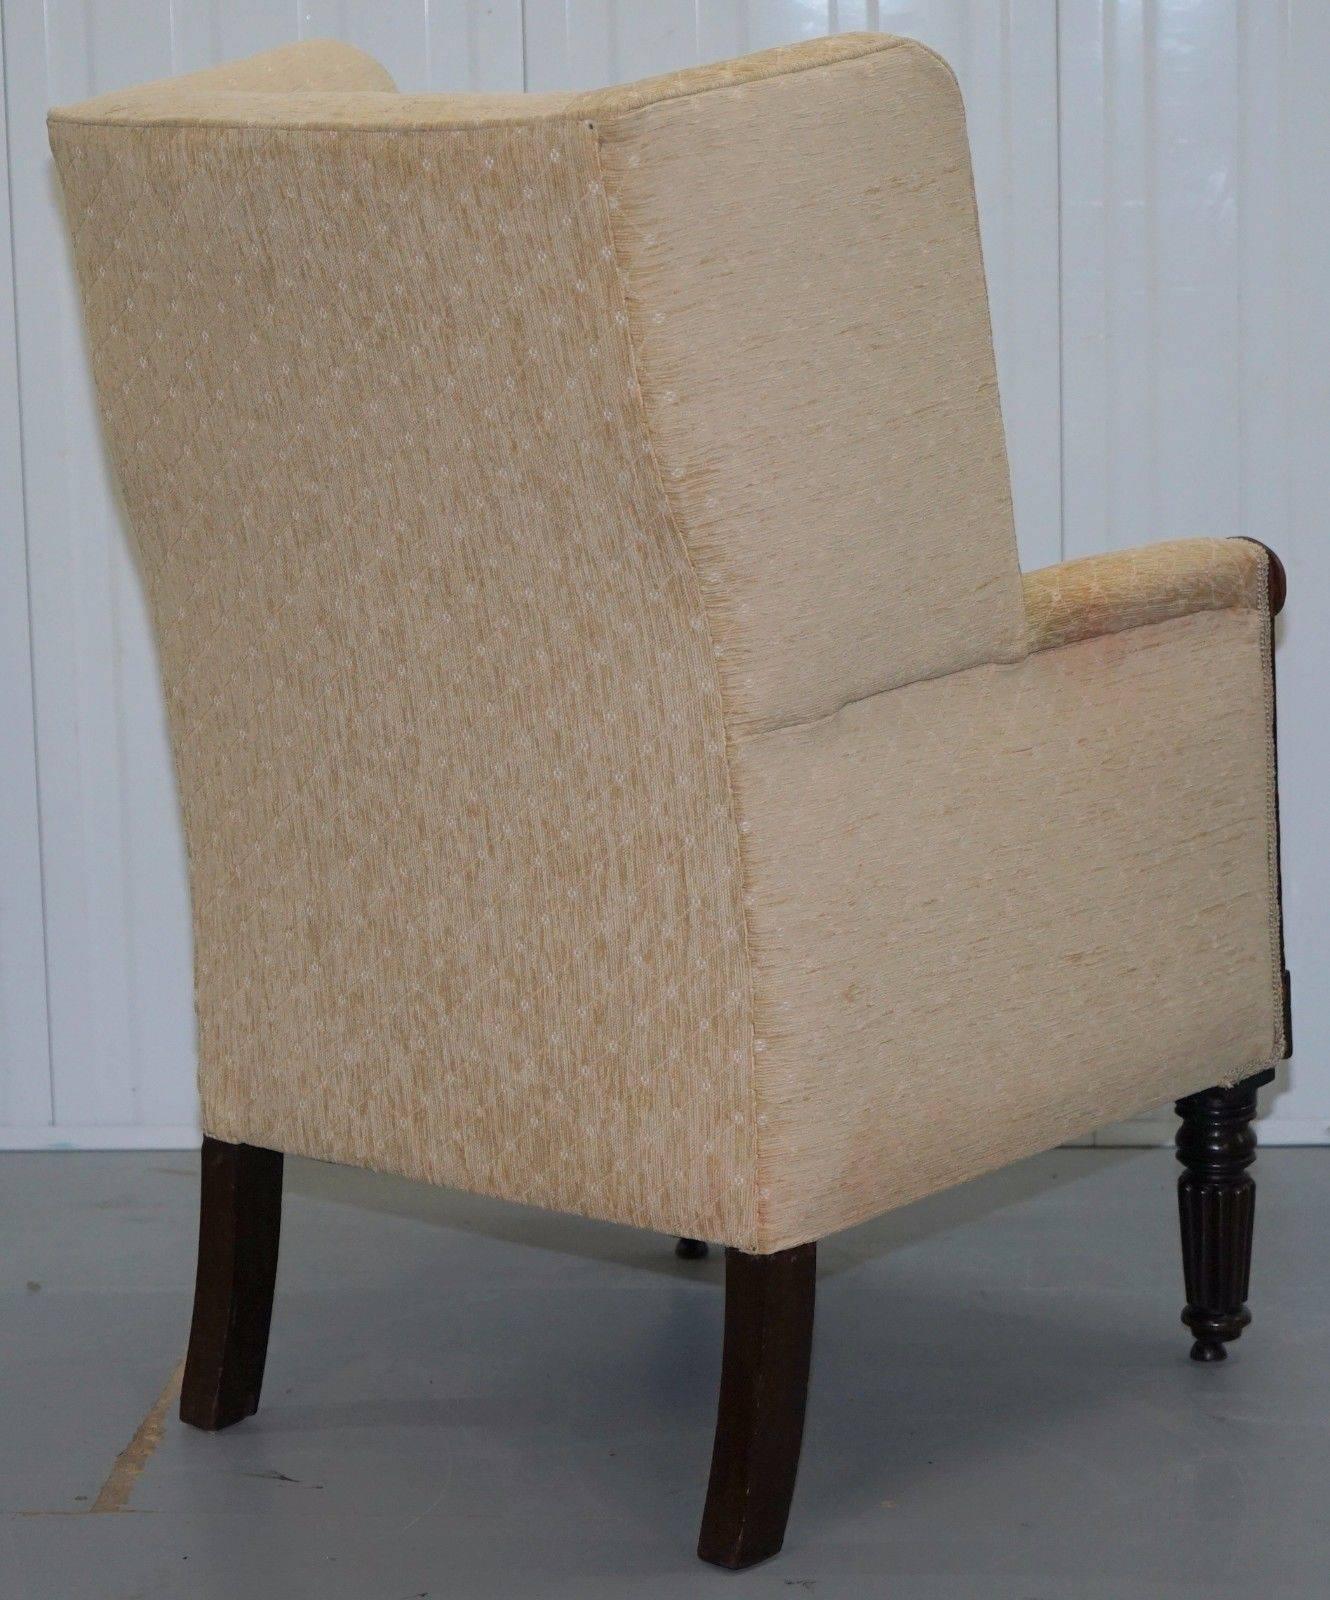 Fabric Rare circa 1790 Gillows Style Porters Chair Mahogany Framed Wingback Rare Find